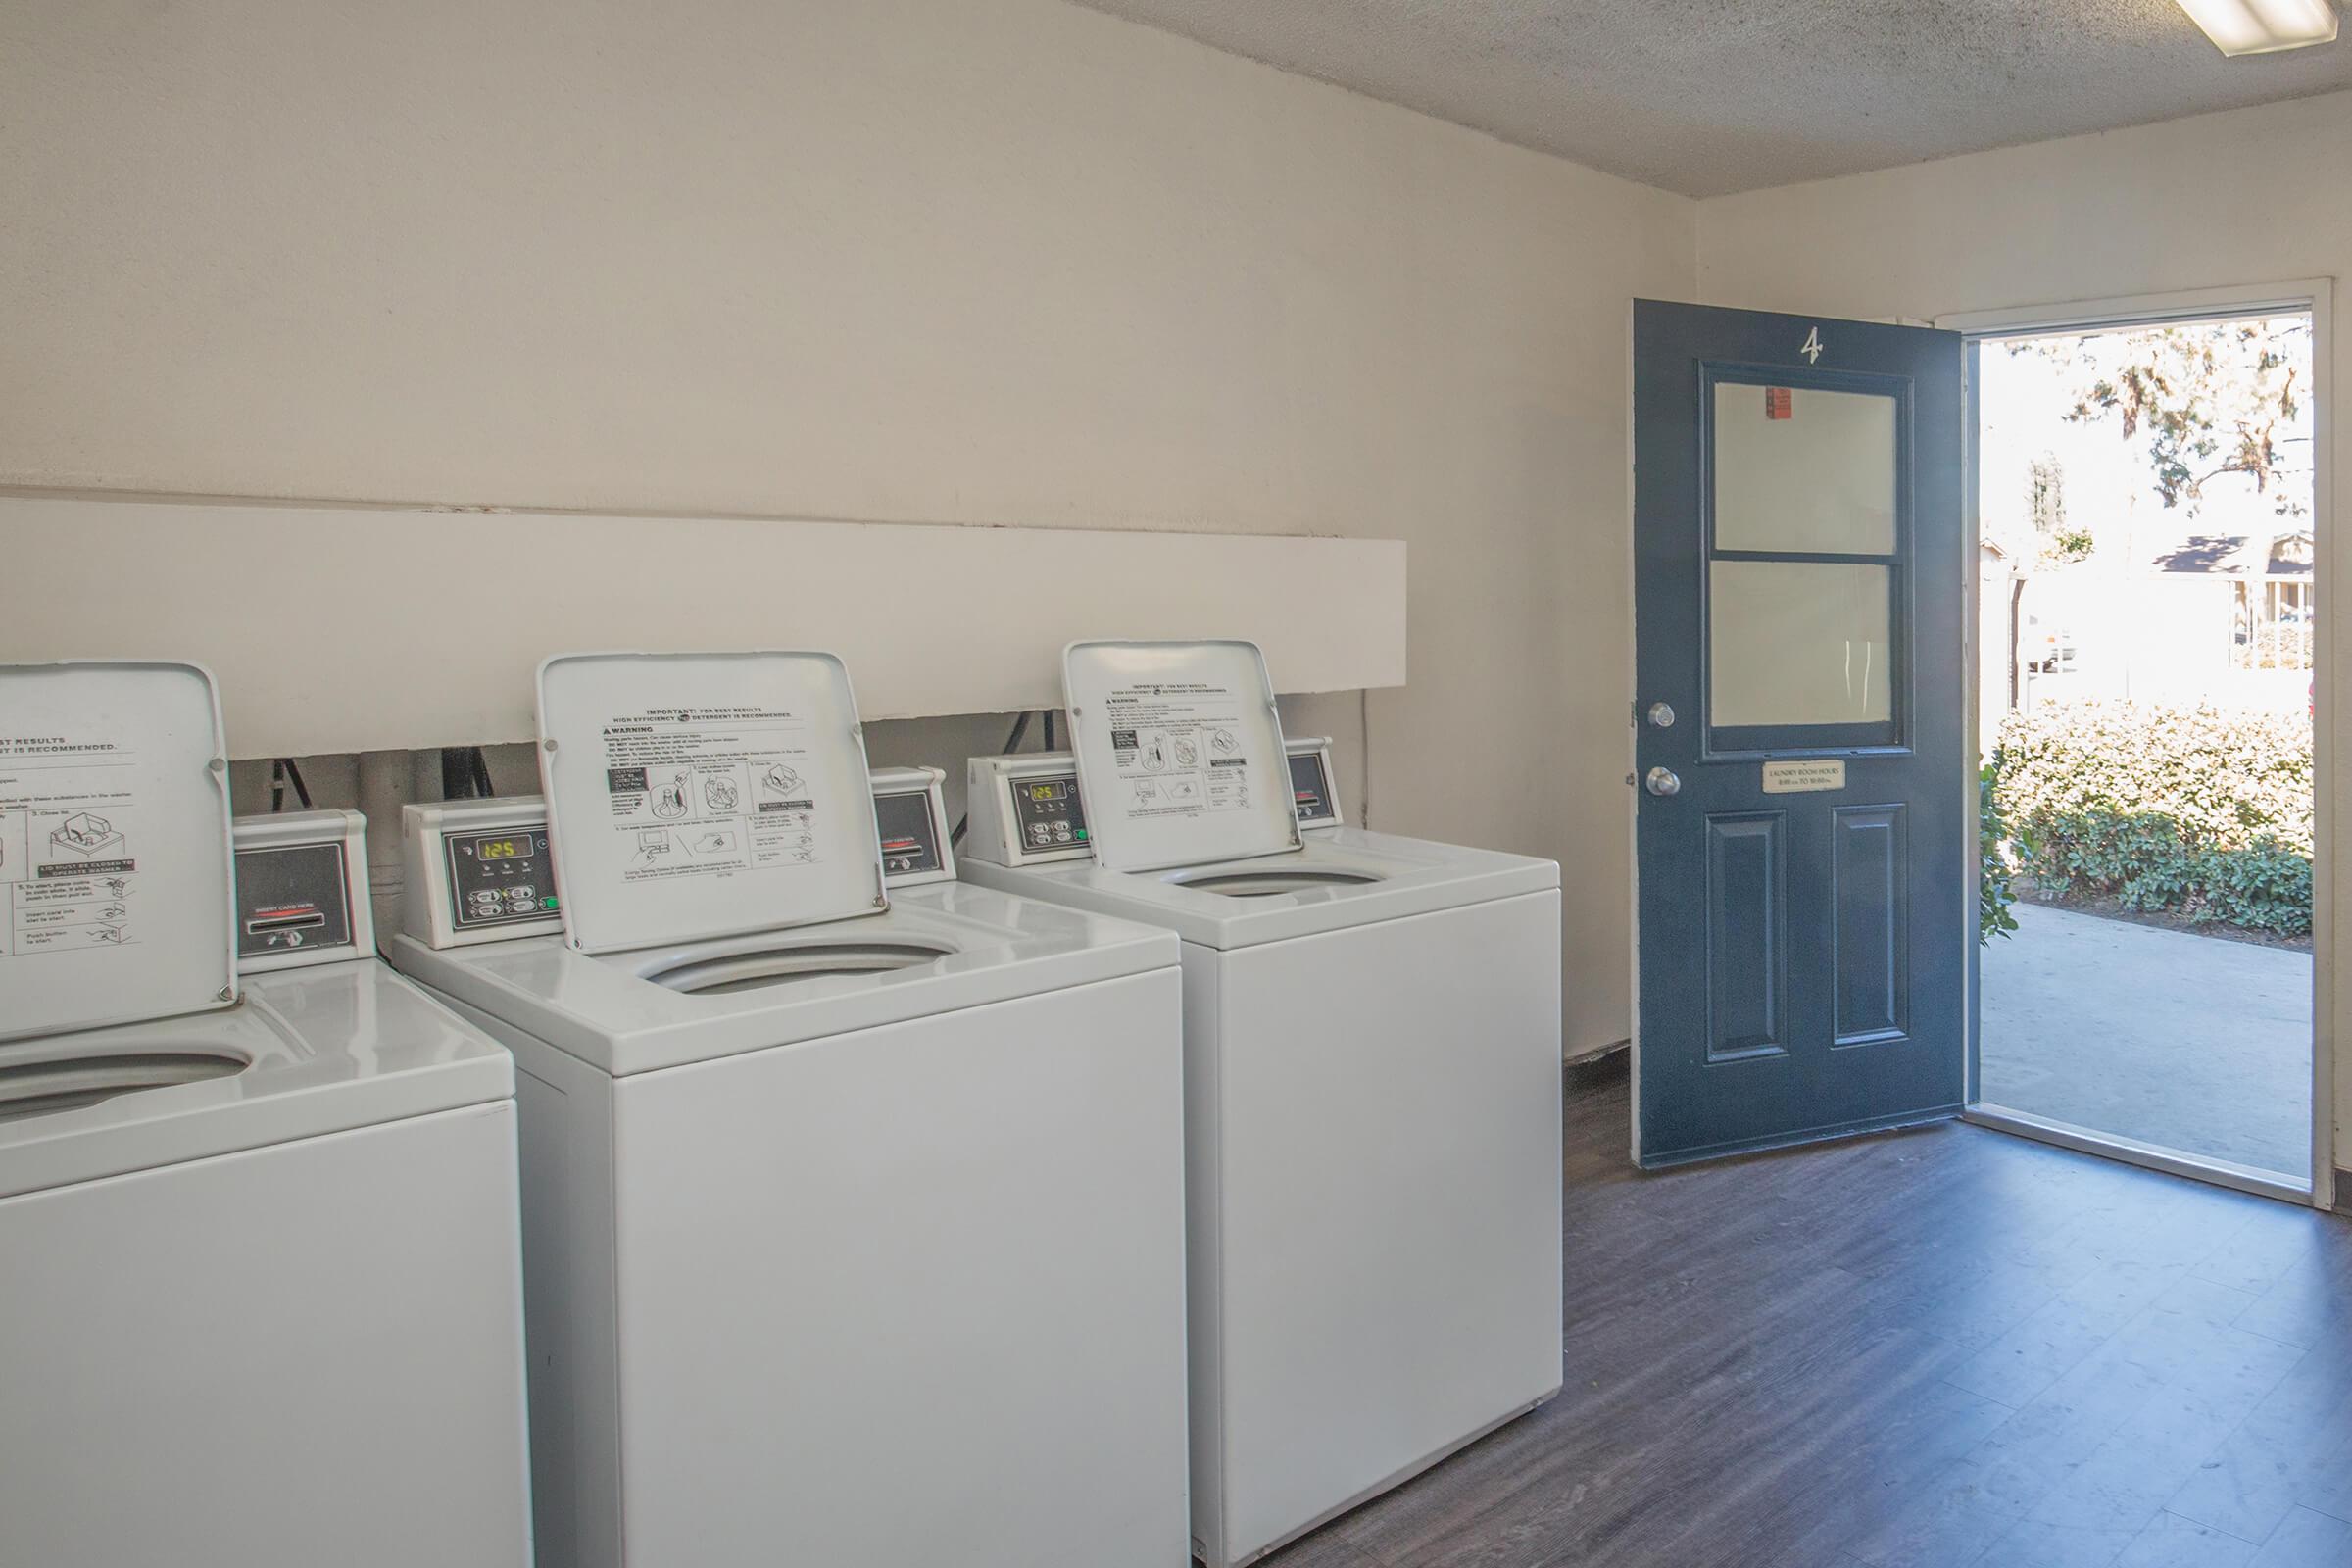 Washers in the community laundry room